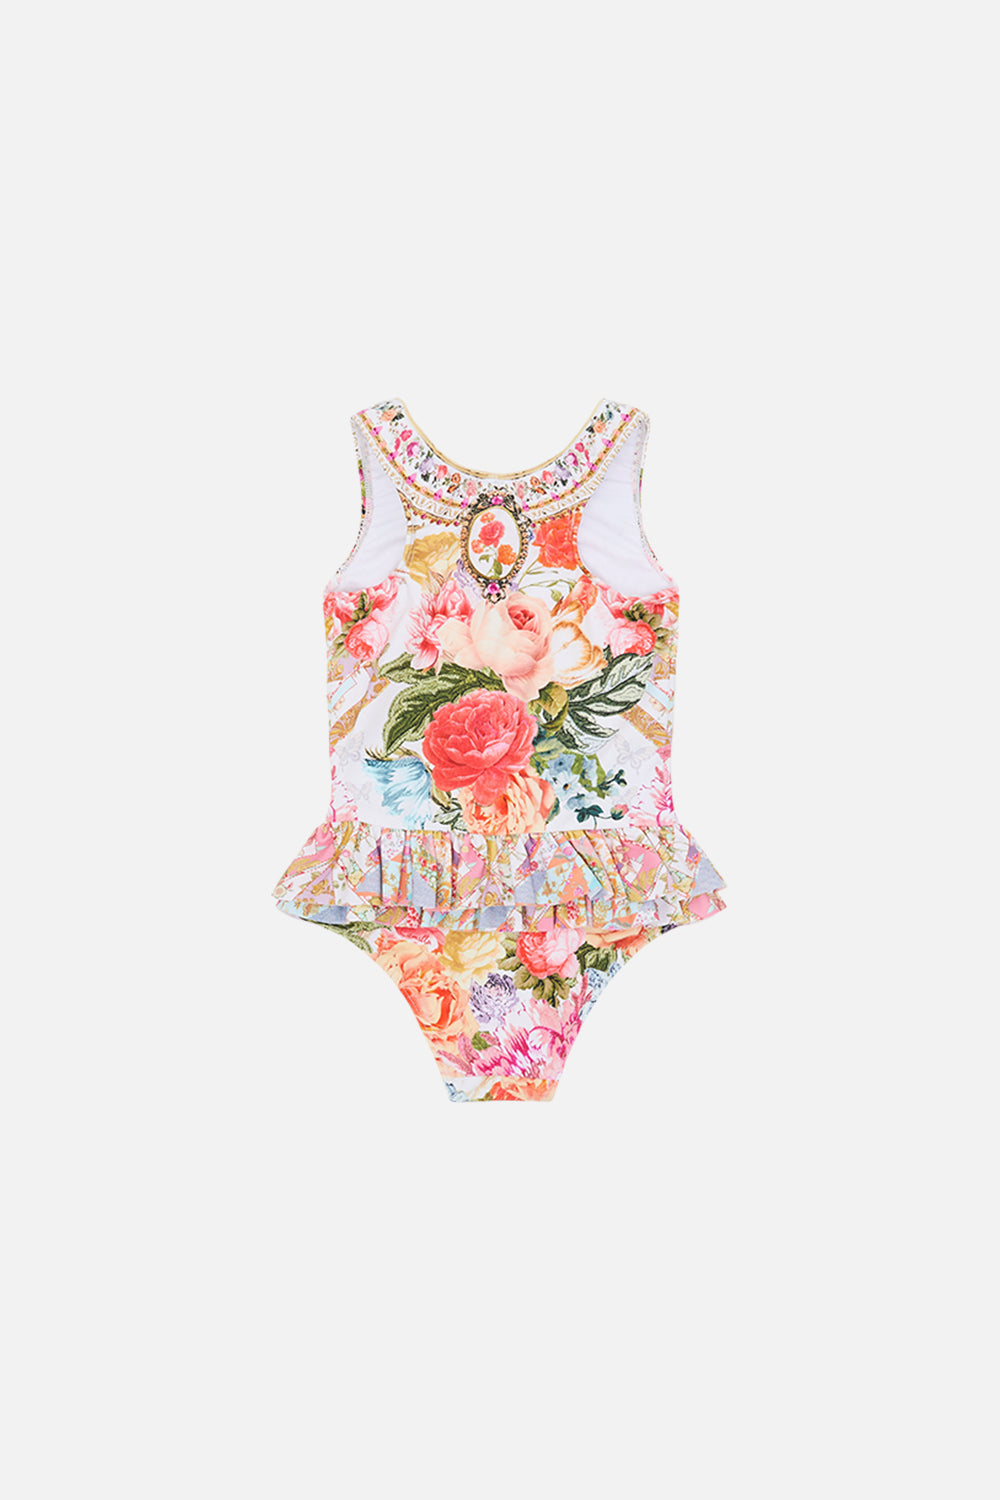 CAMILLA floral babies ruffle back one piece in Sew Yesterday